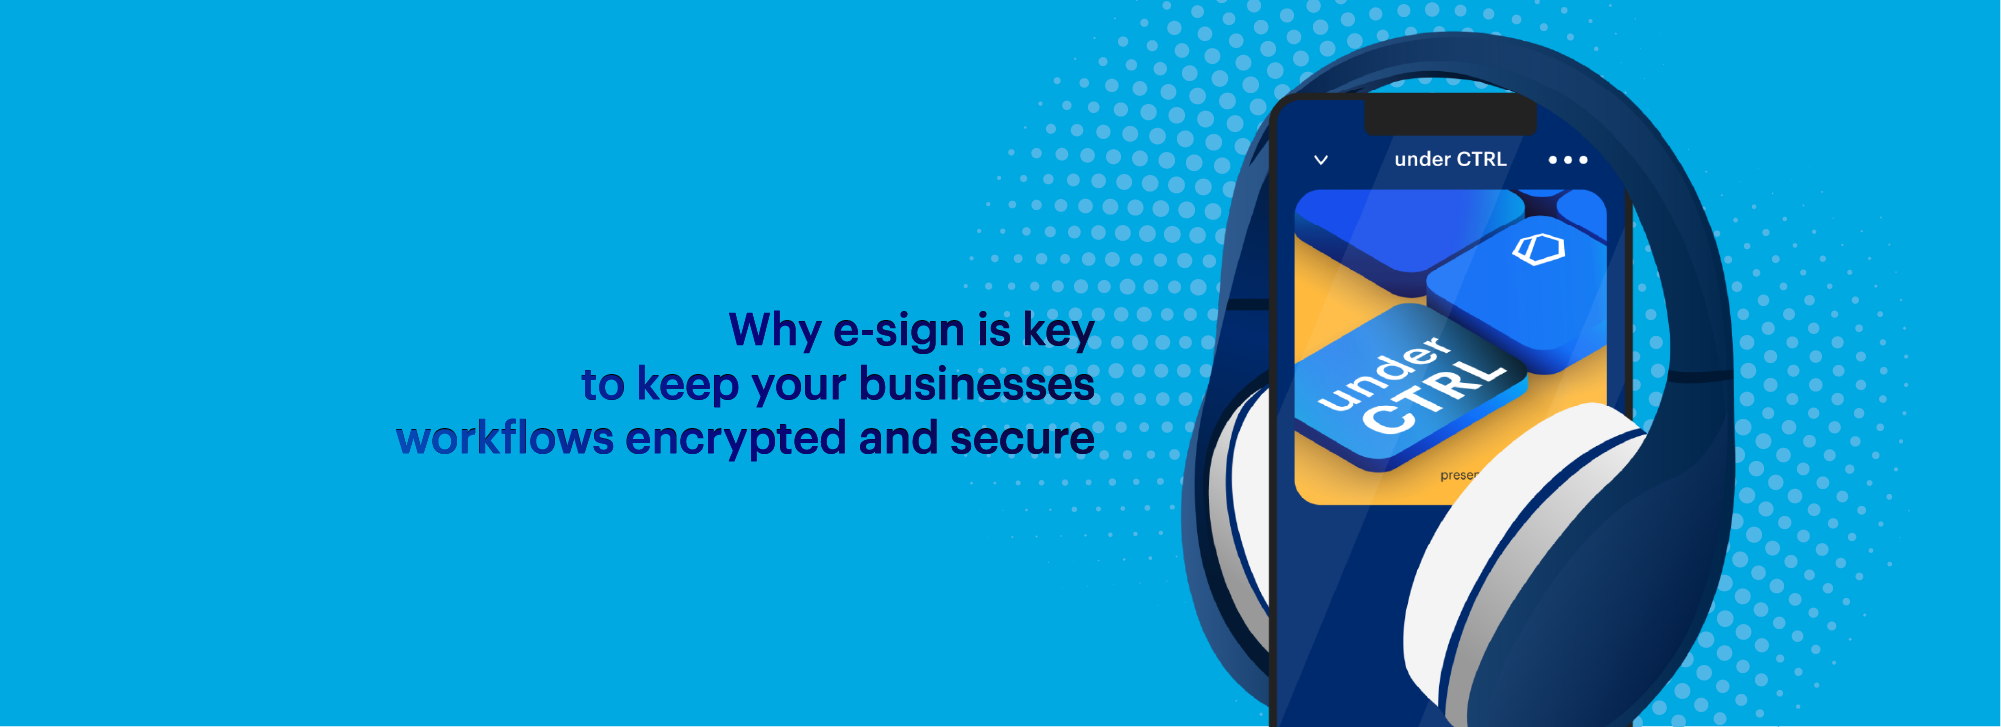 Why eSign is key to keeping business workflows encrypted and secure